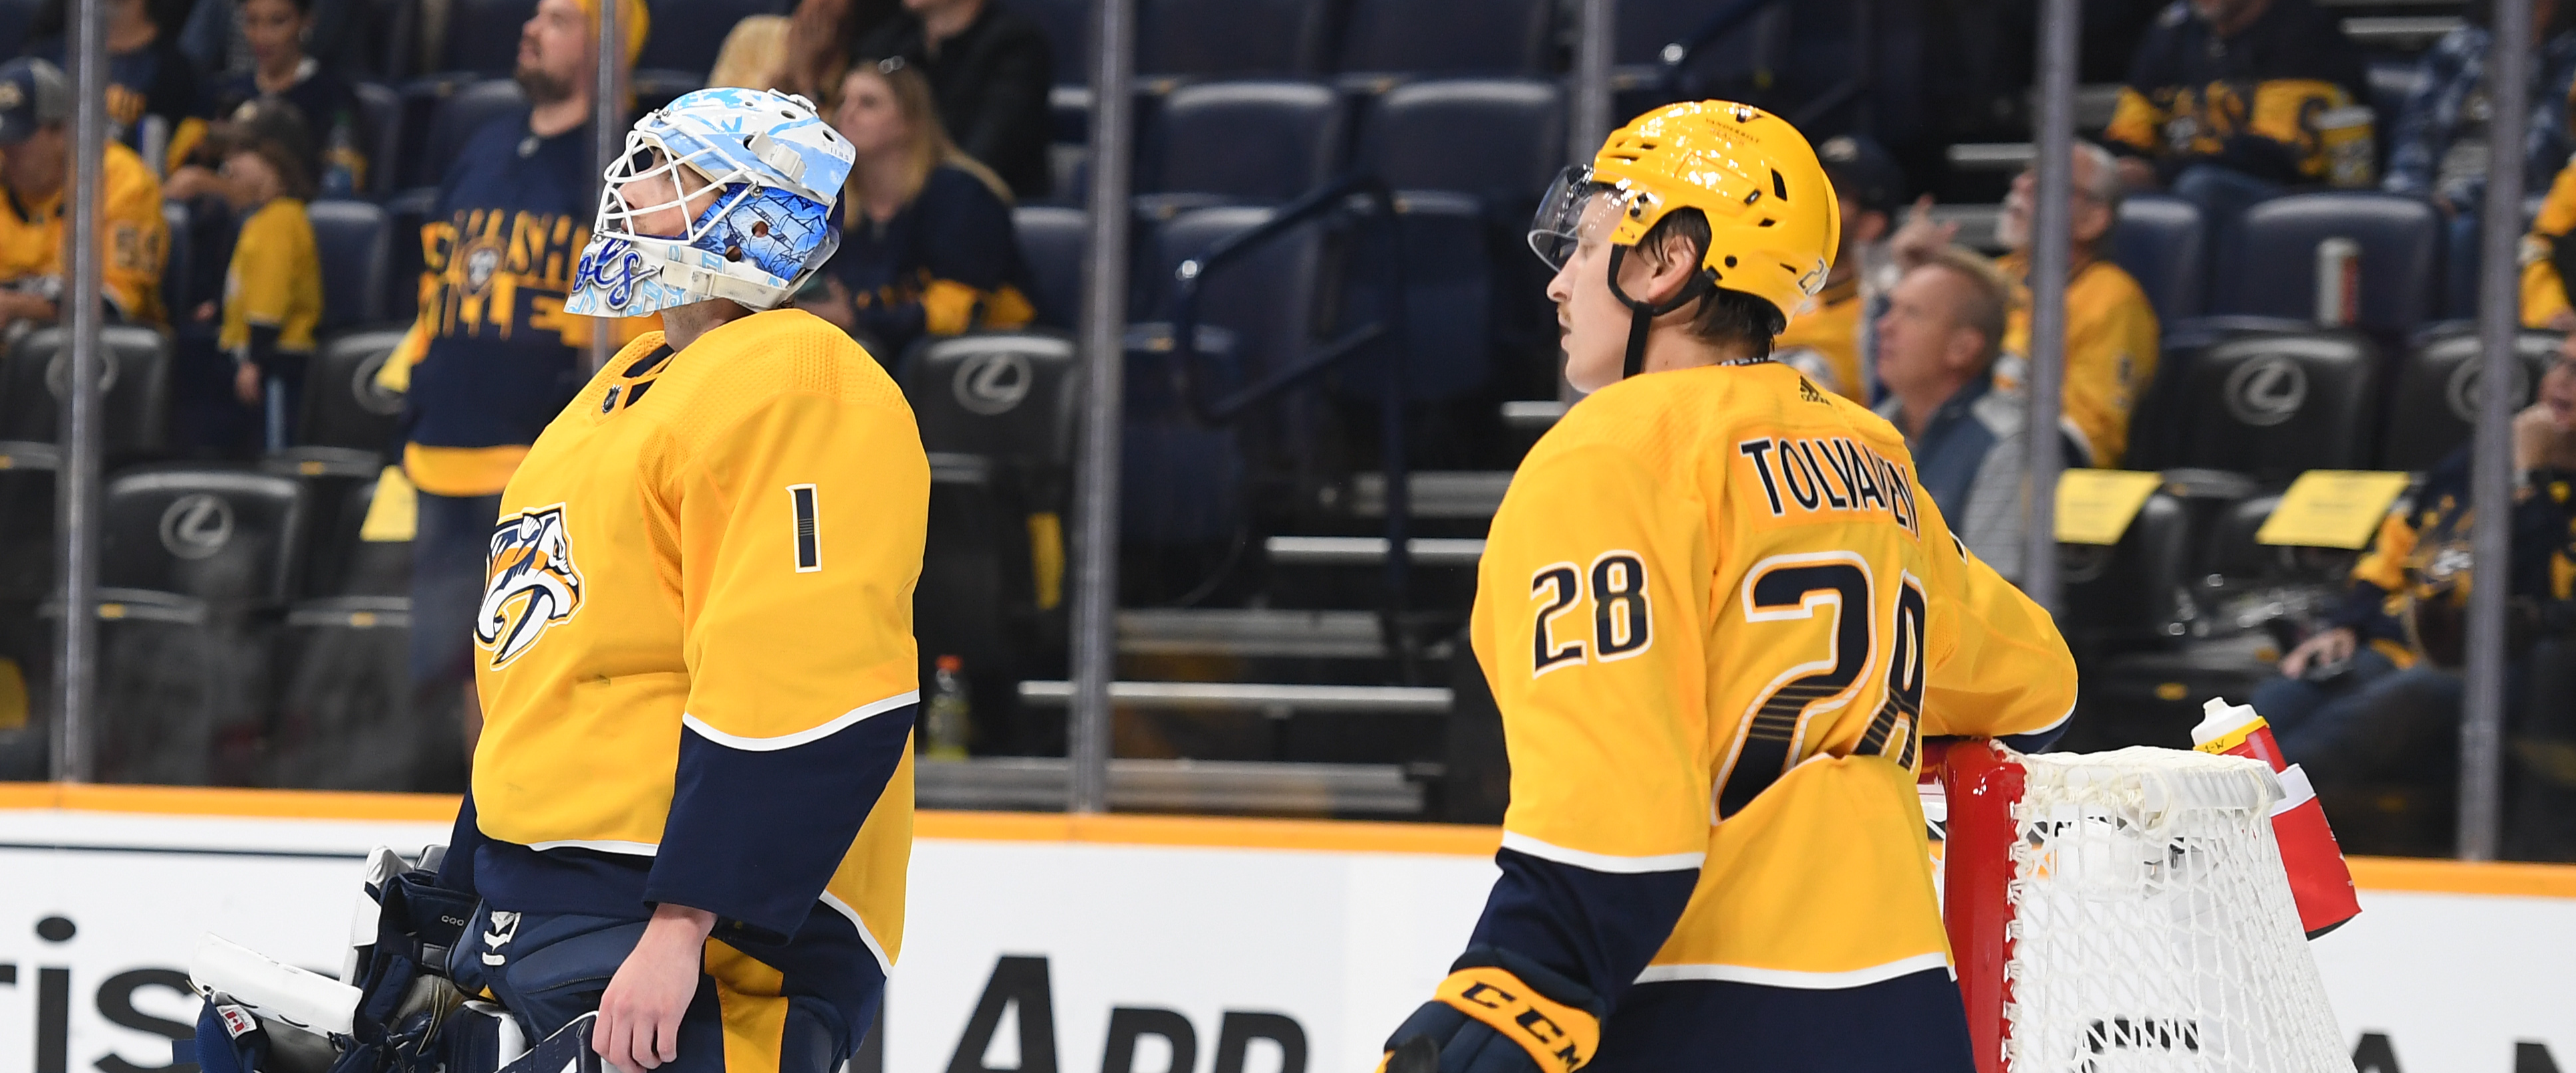 Predators: Waiving Eeli Tolvanen may be one of the worst decisions in franchise history